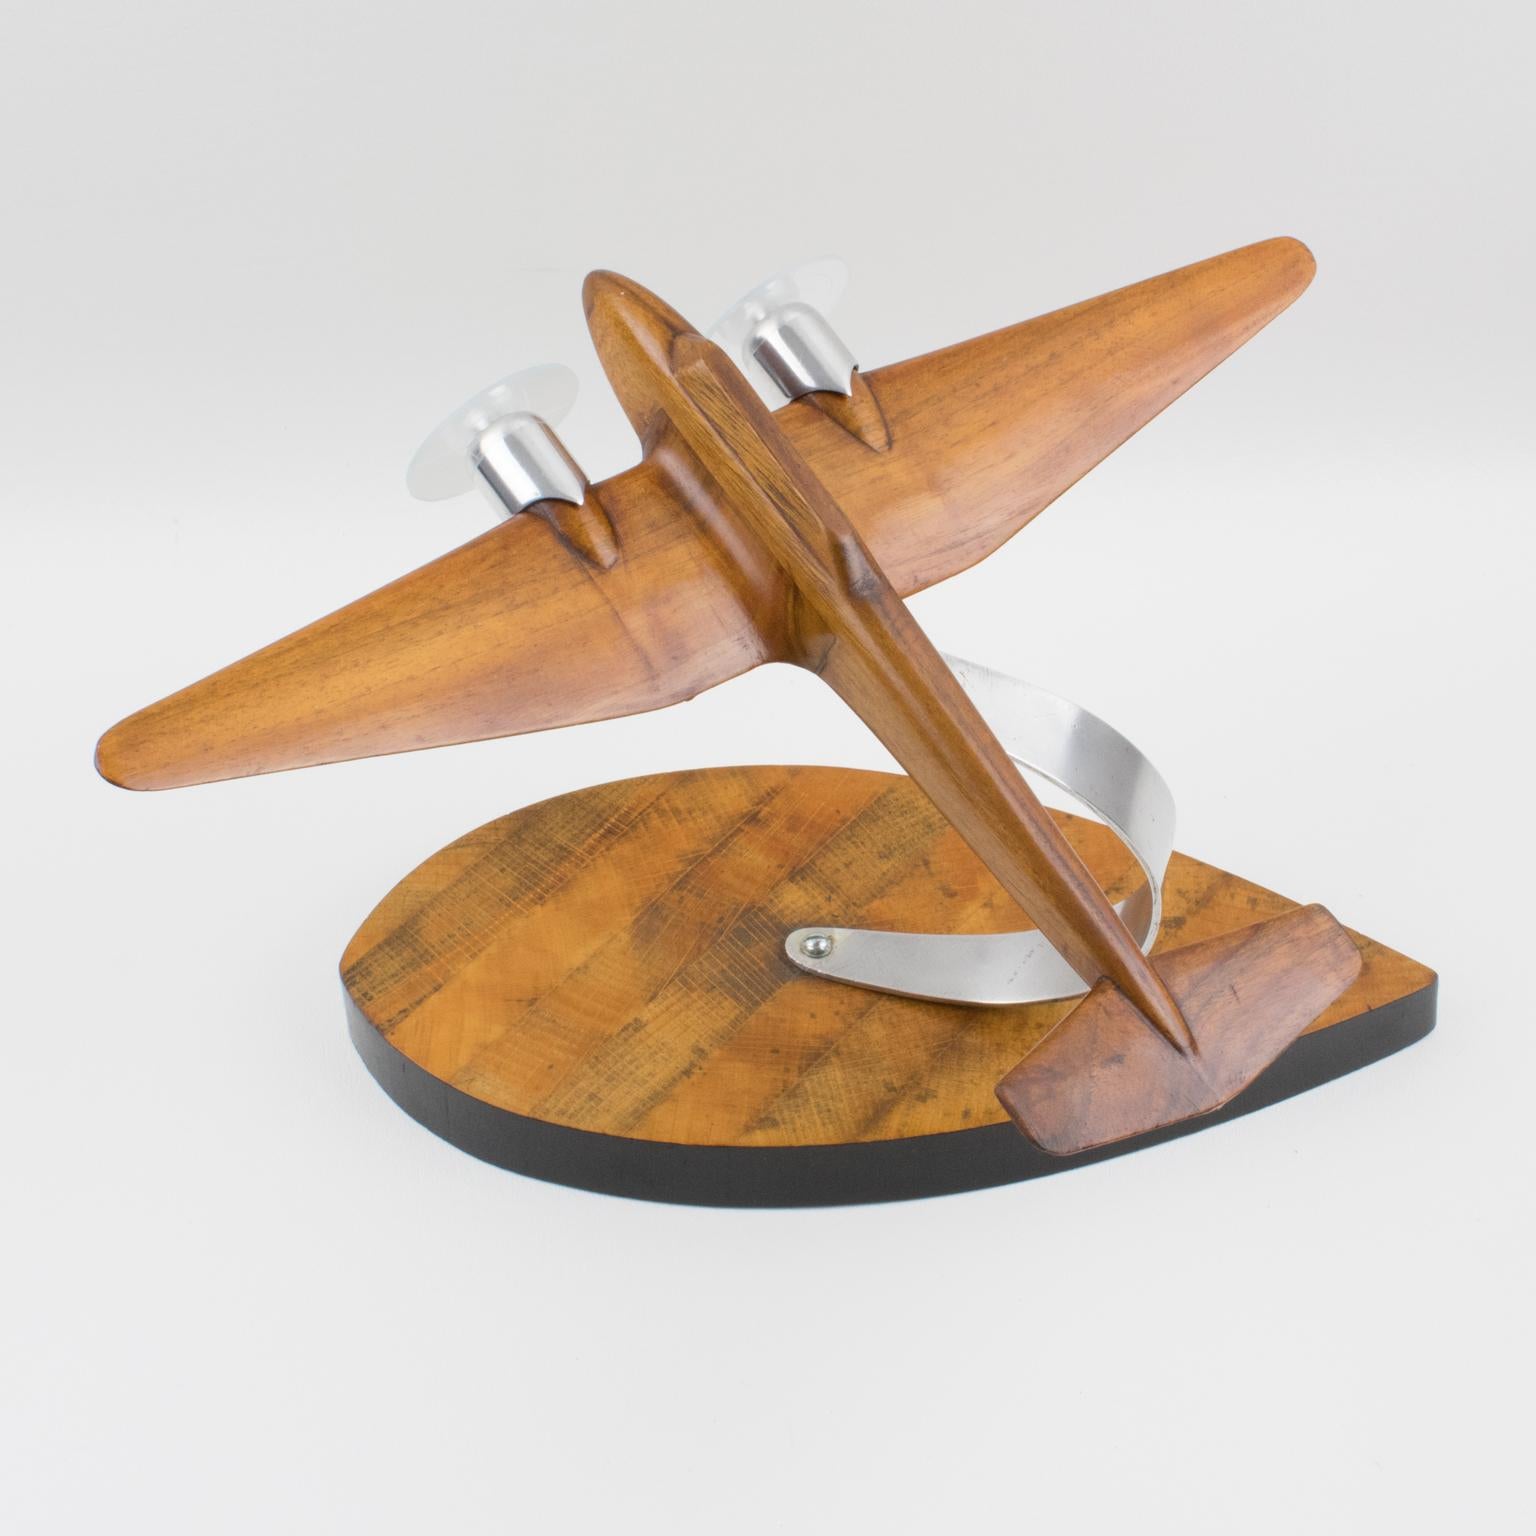 French Art Deco, 1940s Wooden and Aluminum Airplane Aviation Model 9